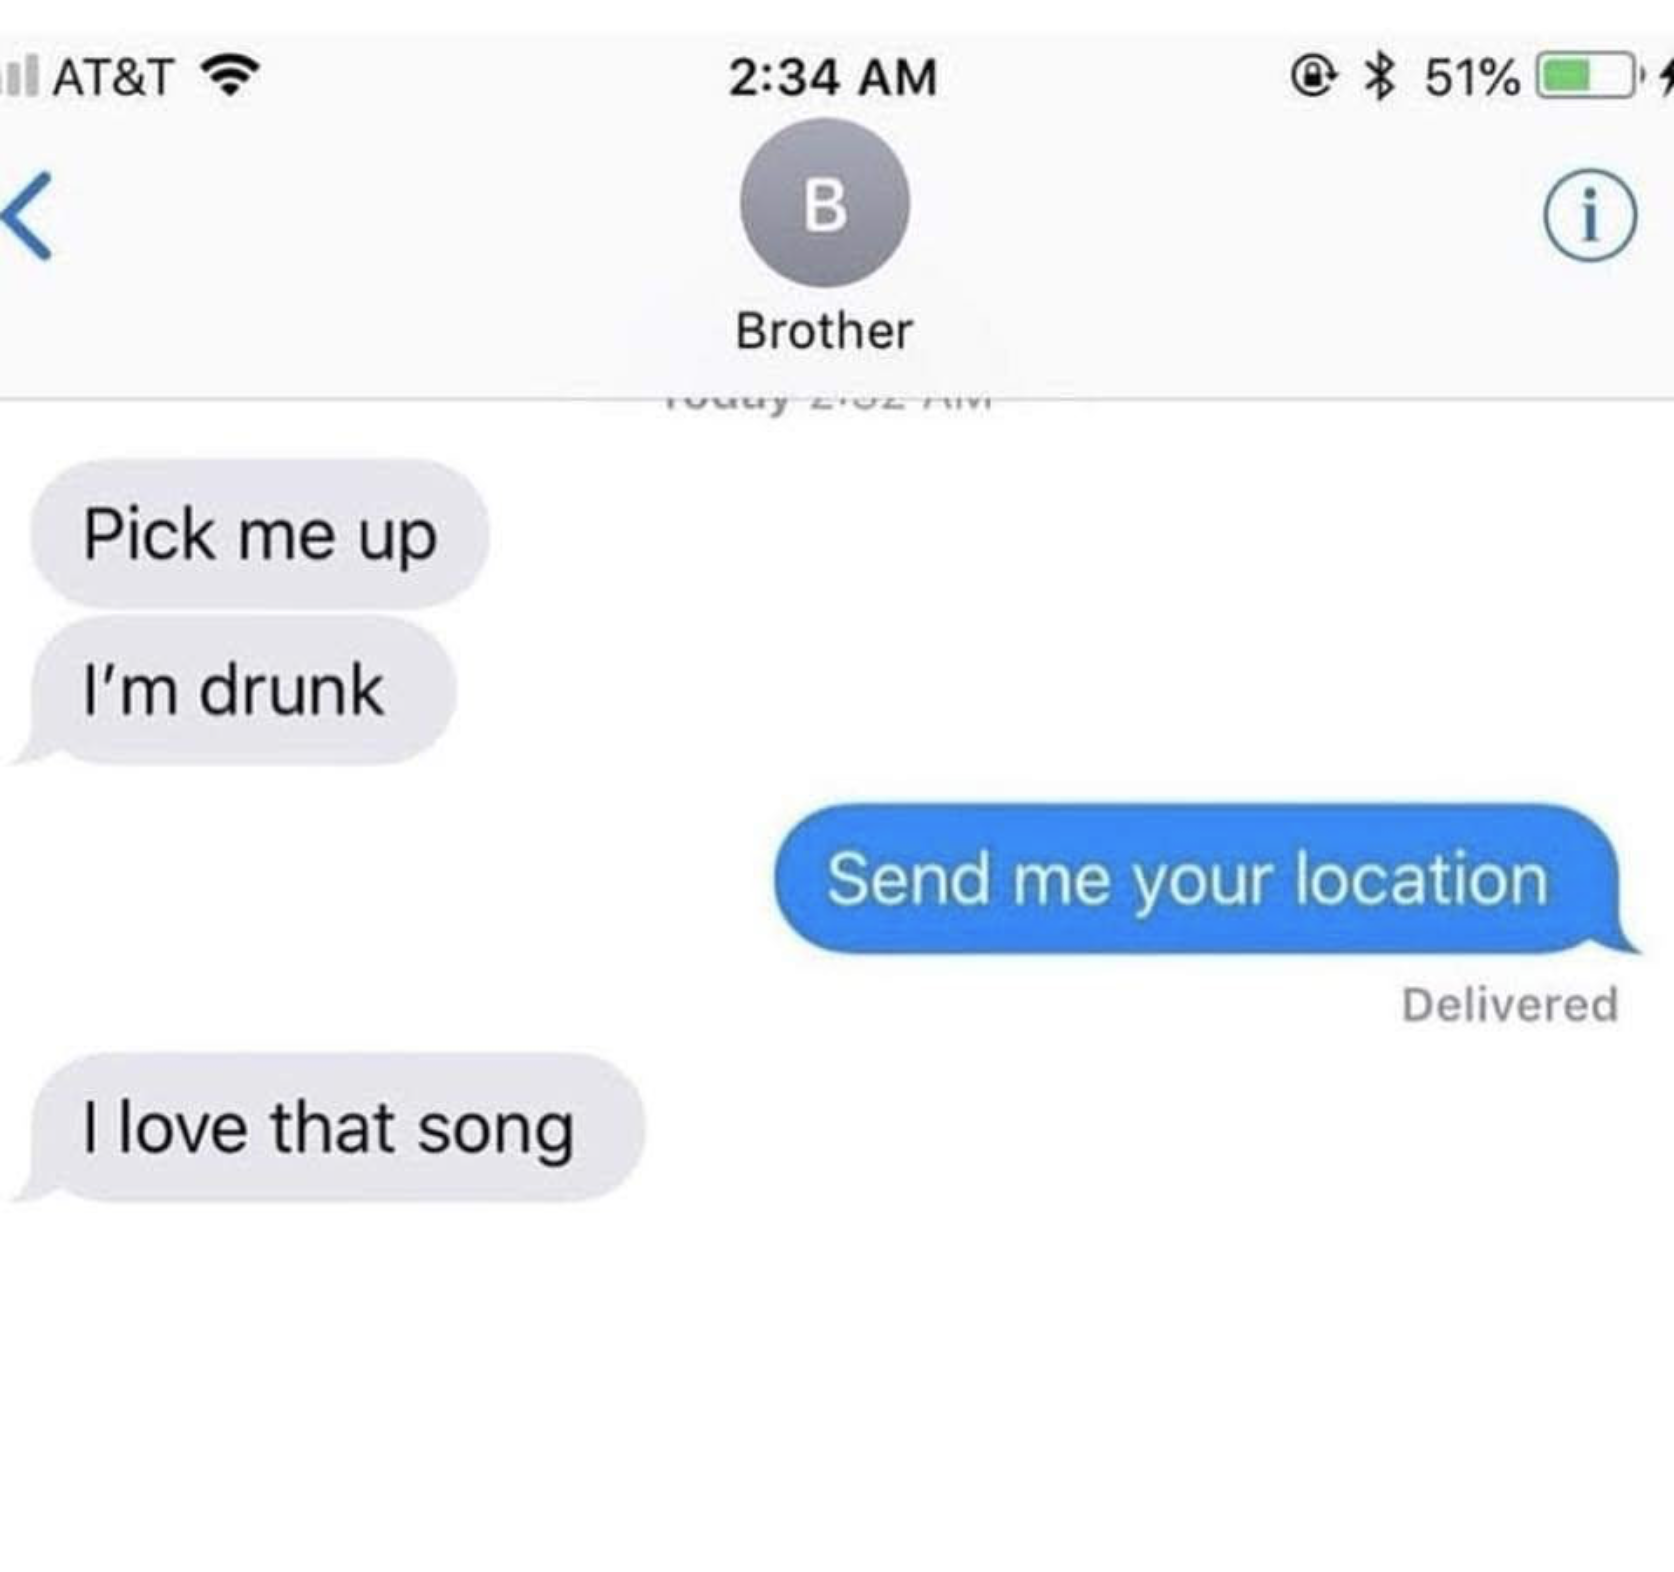 software - At&T @ 51% 1 Brother Pick me up I'm drunk Send me your location Delivered I love that song